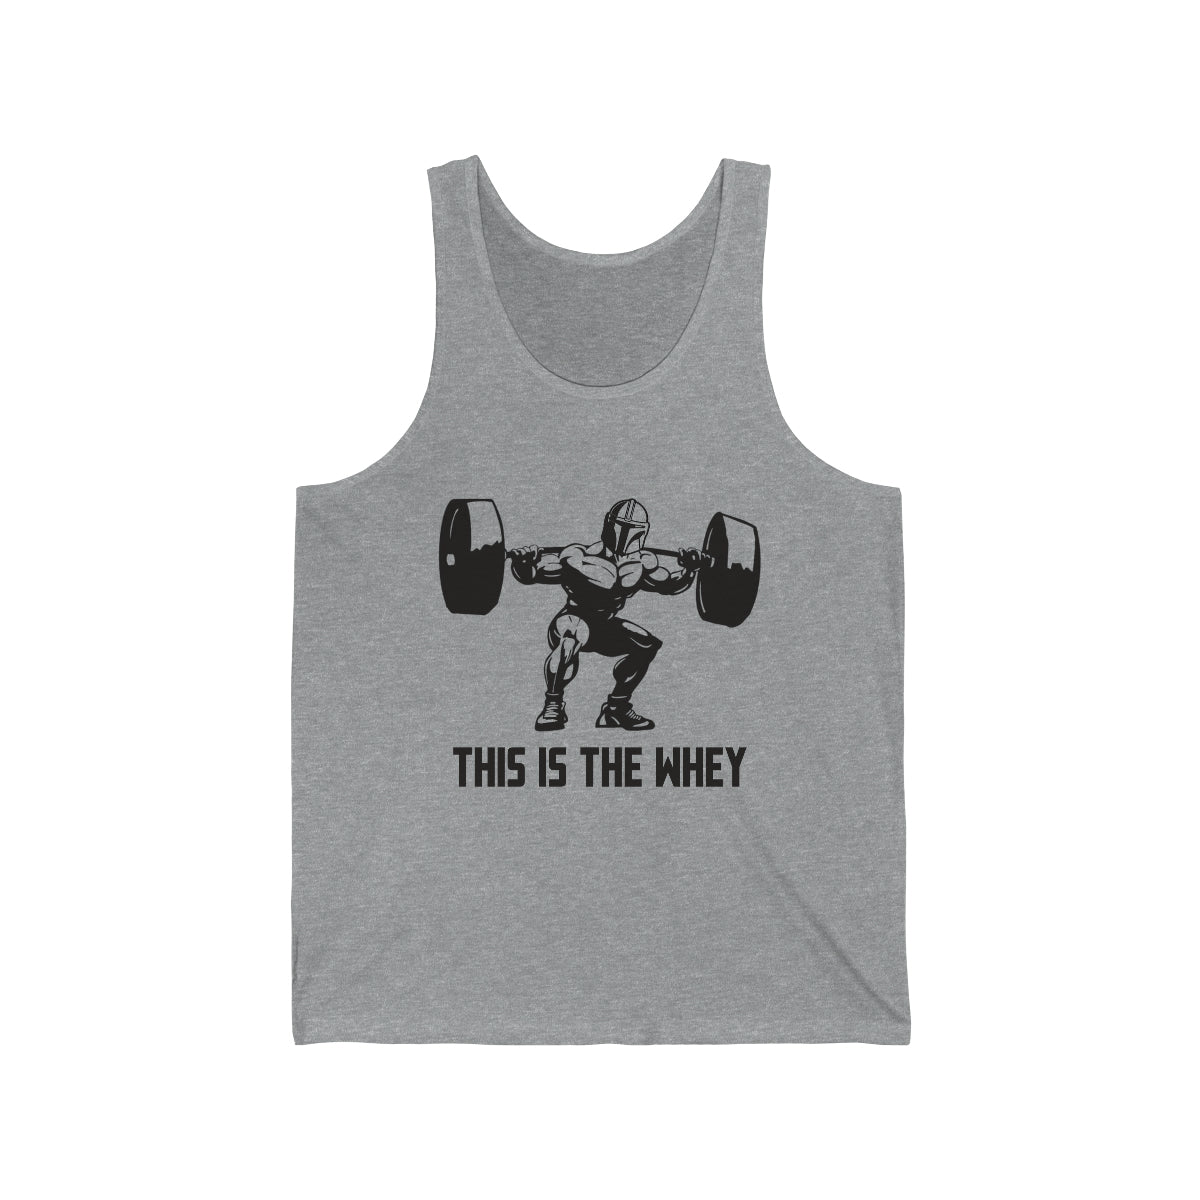 THIS IS THE WHEY - Unisex Jersey Tank